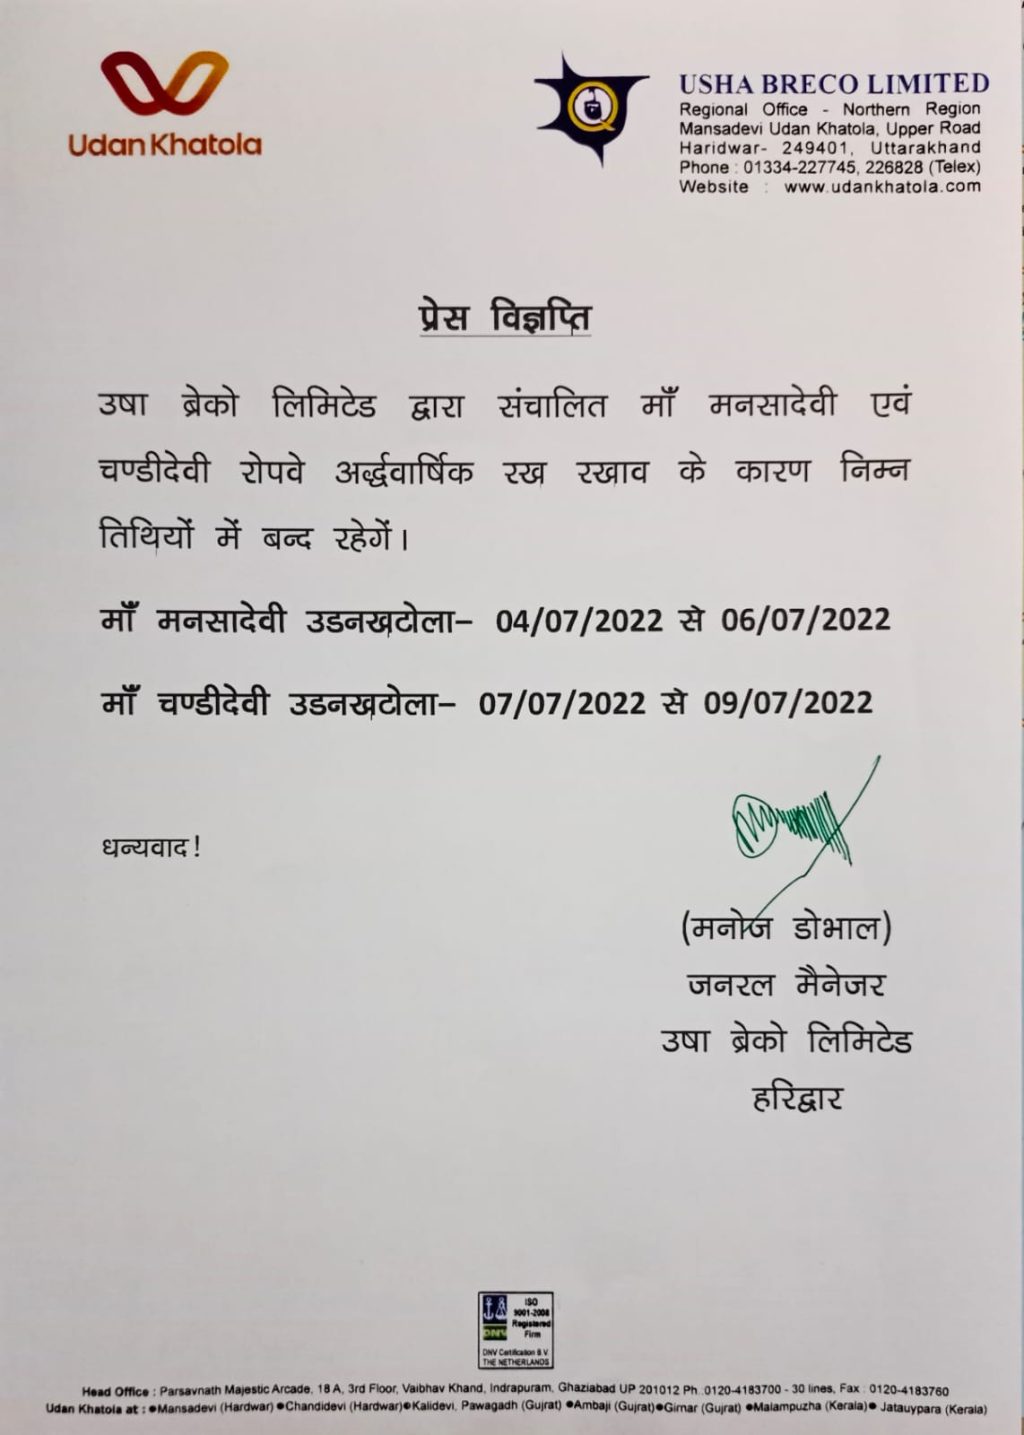 Ropway service of mansha devi and cgandi devi temple will be suspended for maintaince